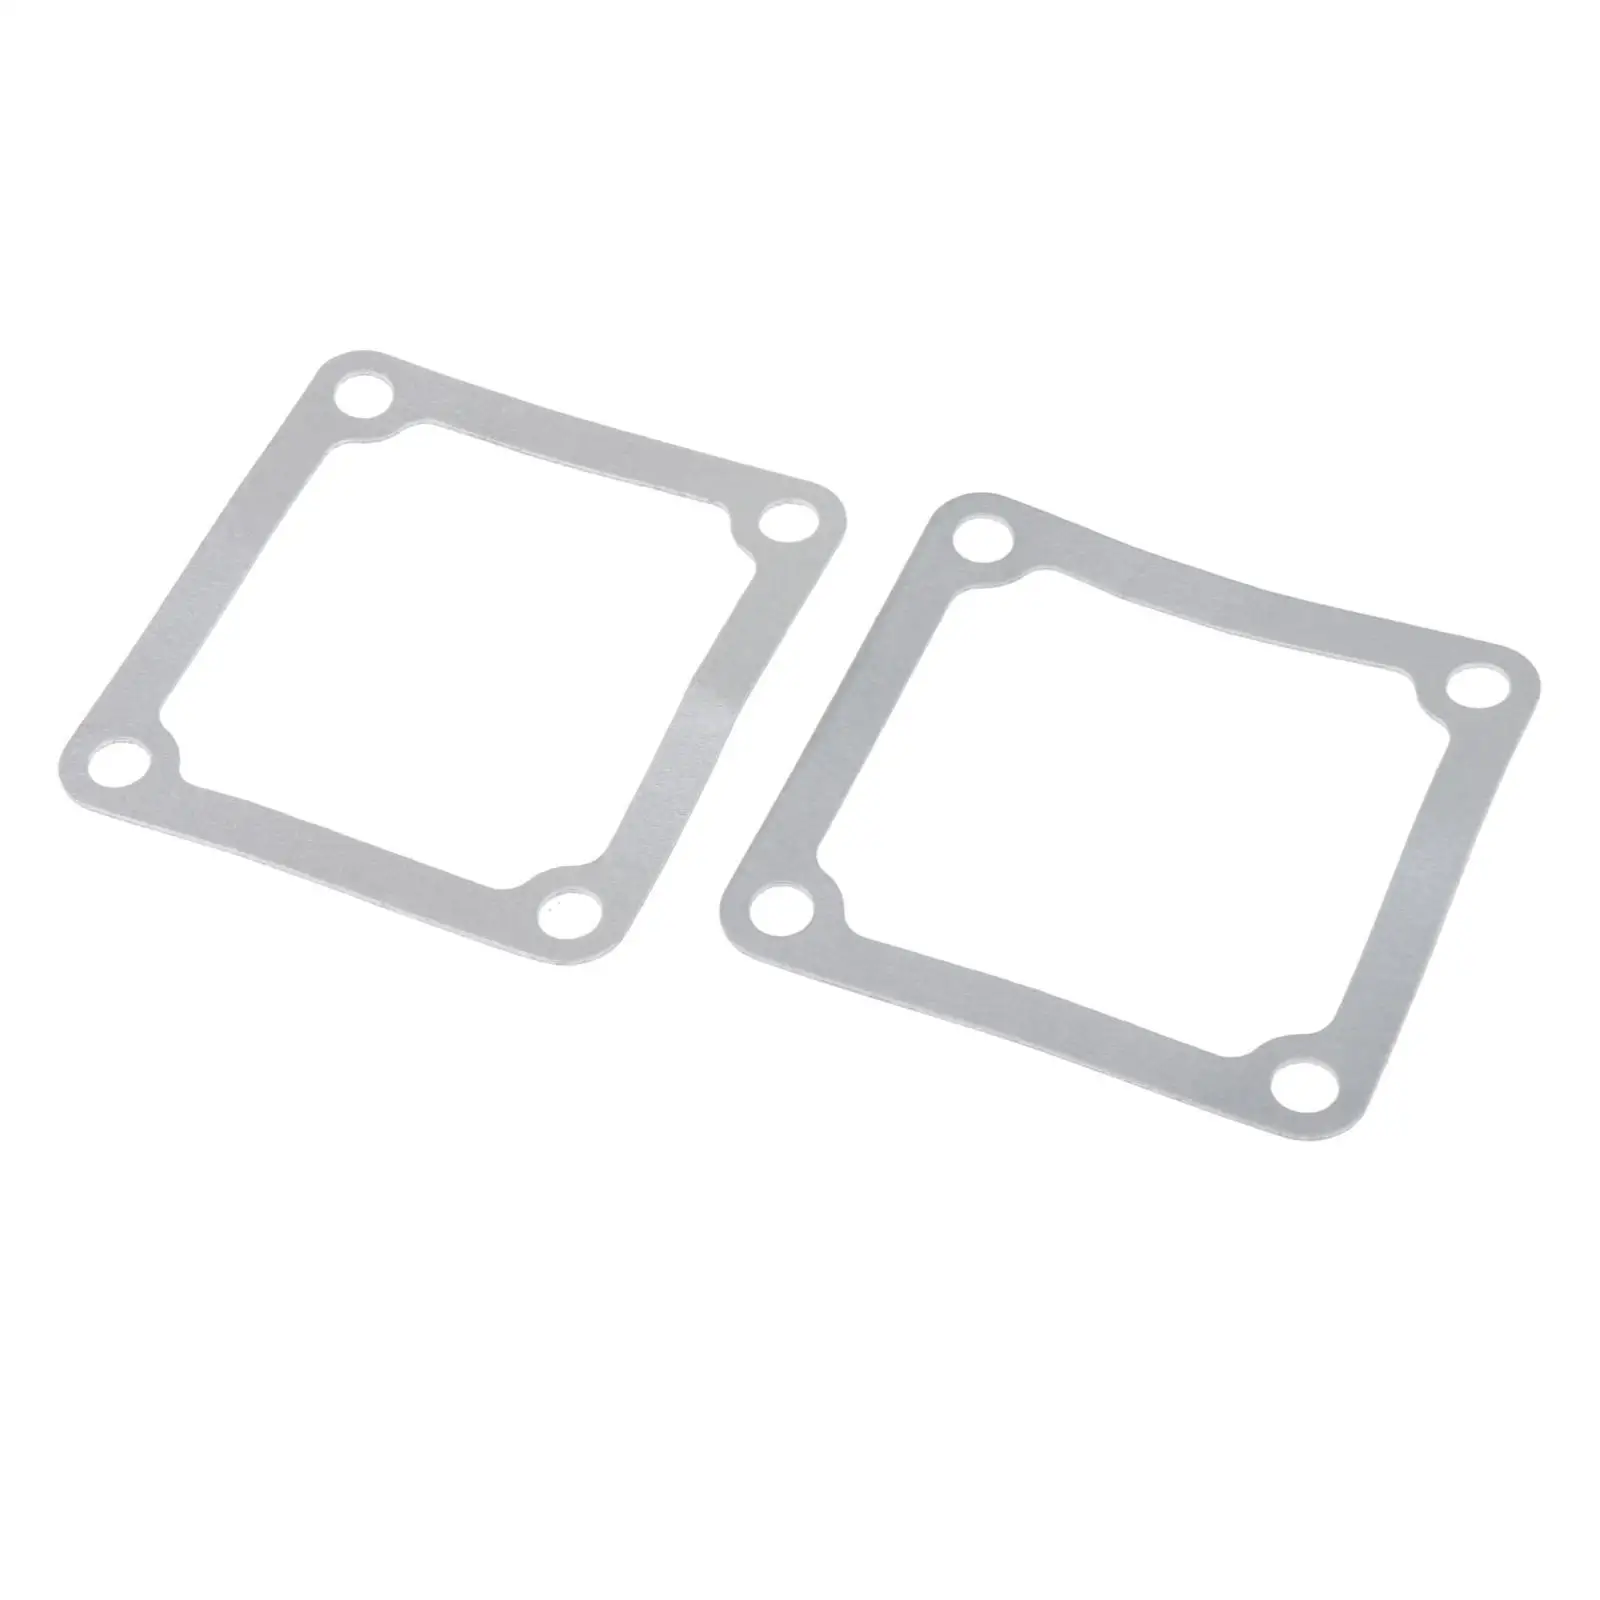 2x Intake Heater Grid Gaskets Auto Parts Durable Power 93x98mm Professional for